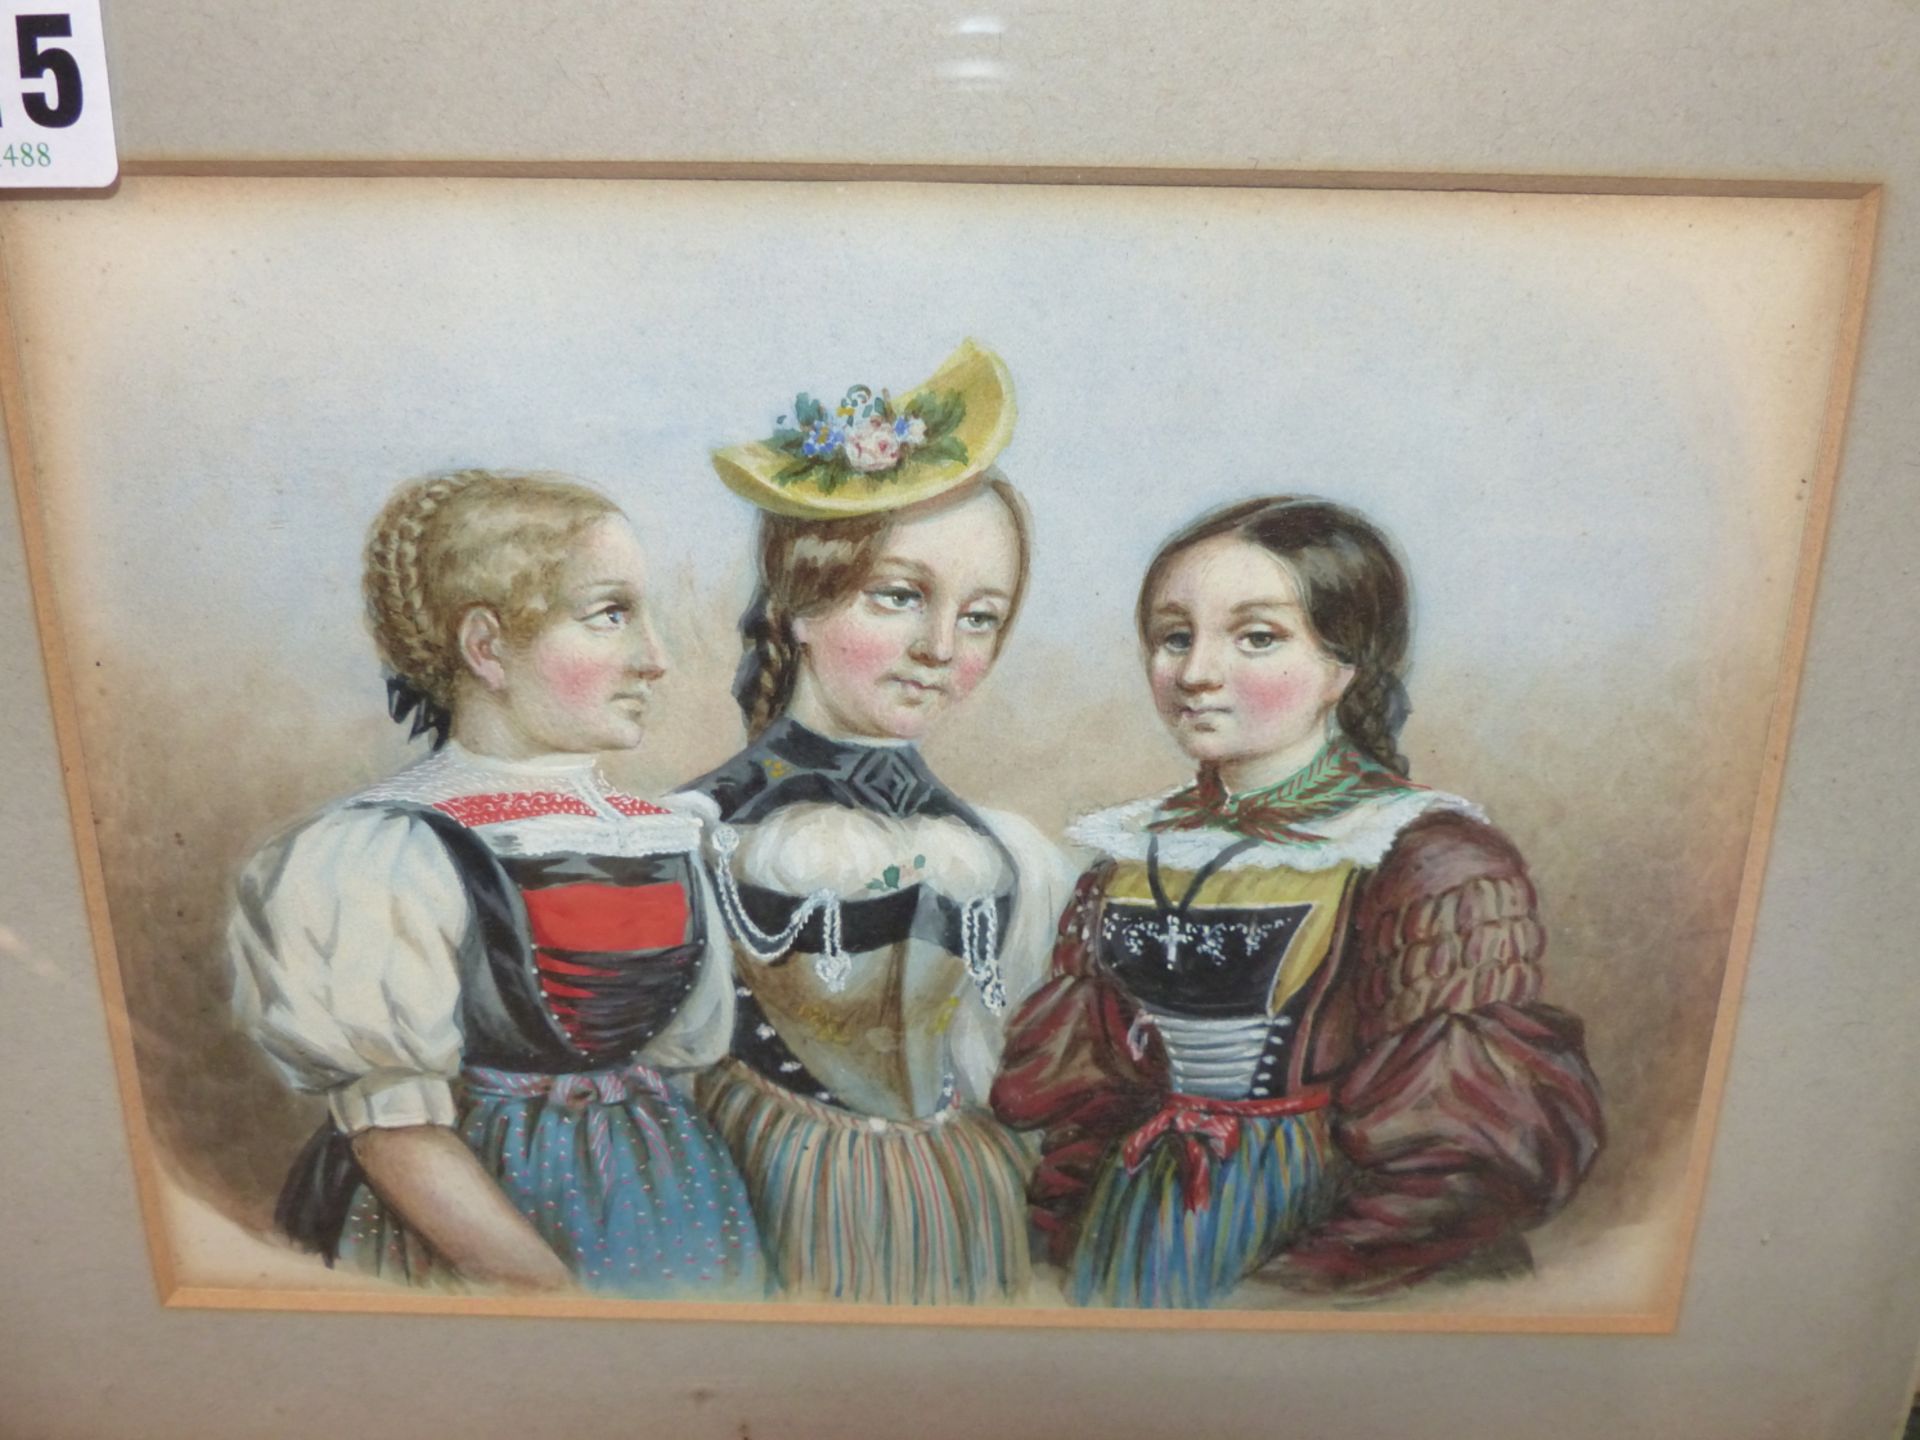 LATE 19TH CENTURY/ EARLY 20TH CENTURY GERMAN SCHOOL.- THREE GIRLS IN TRADITIONAL DRESS- WATERCOLOUR. - Image 2 of 4